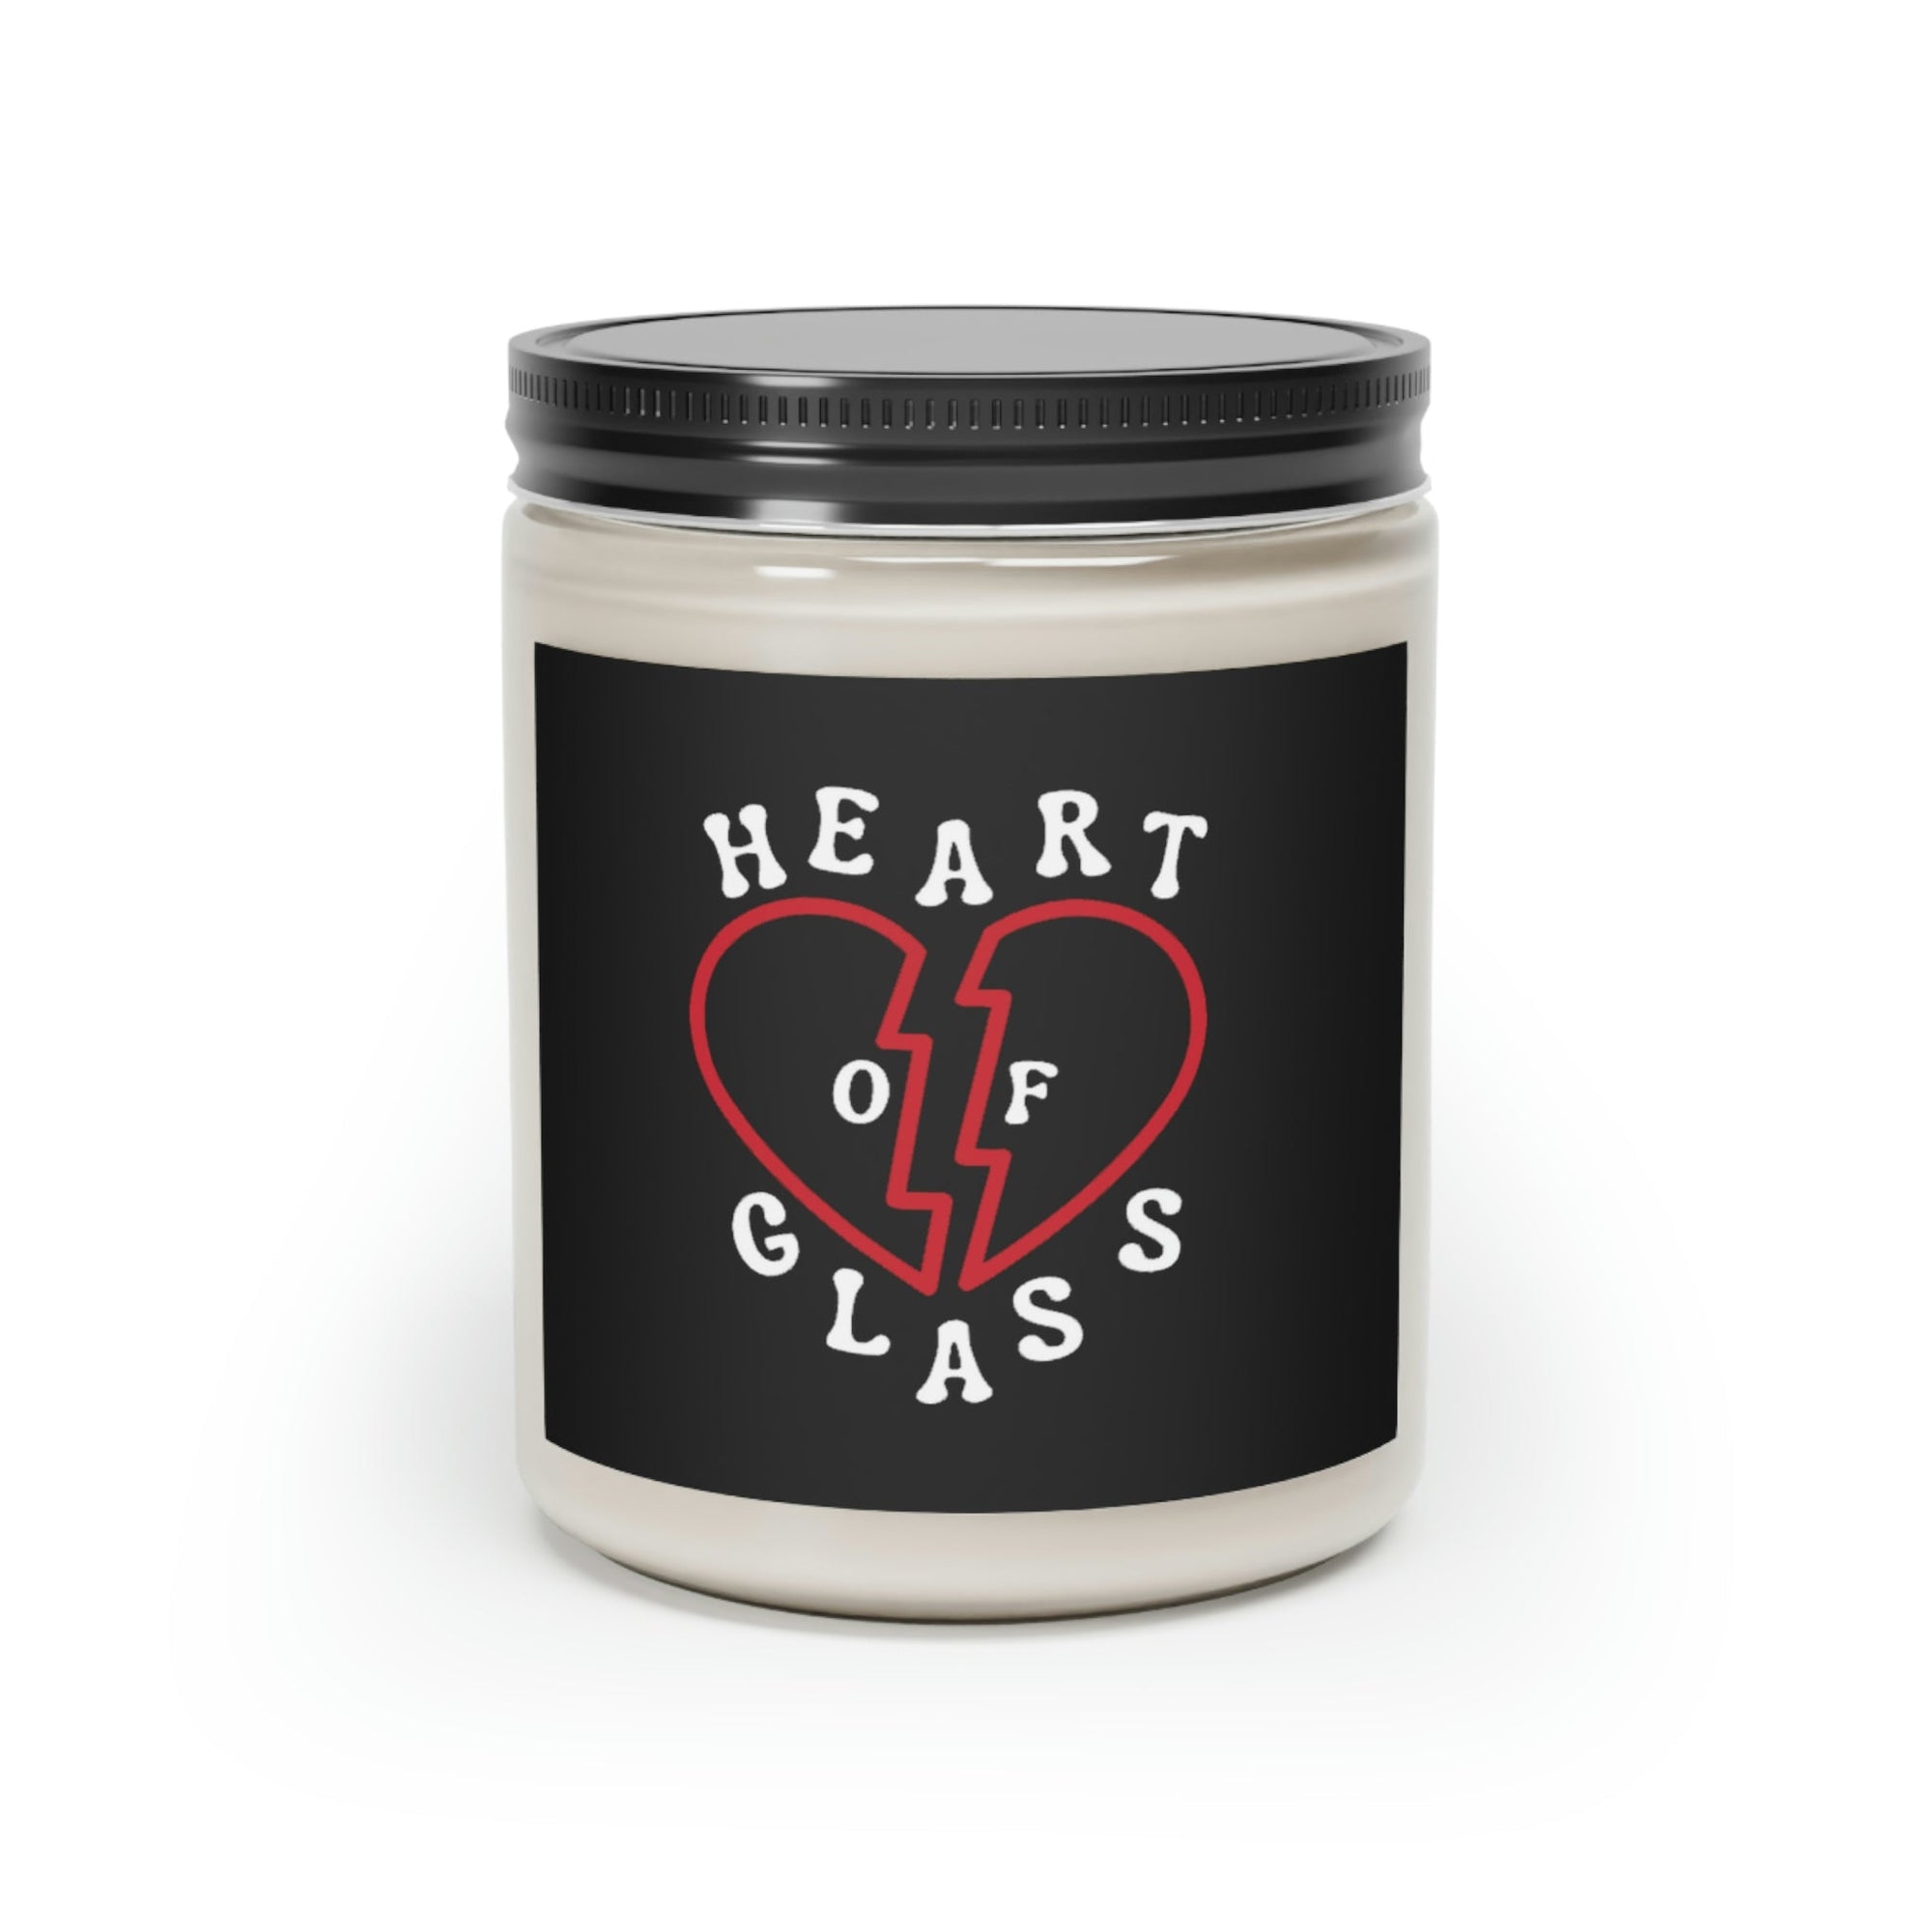 Heart of Glass Hand-Poured Vegan Candle